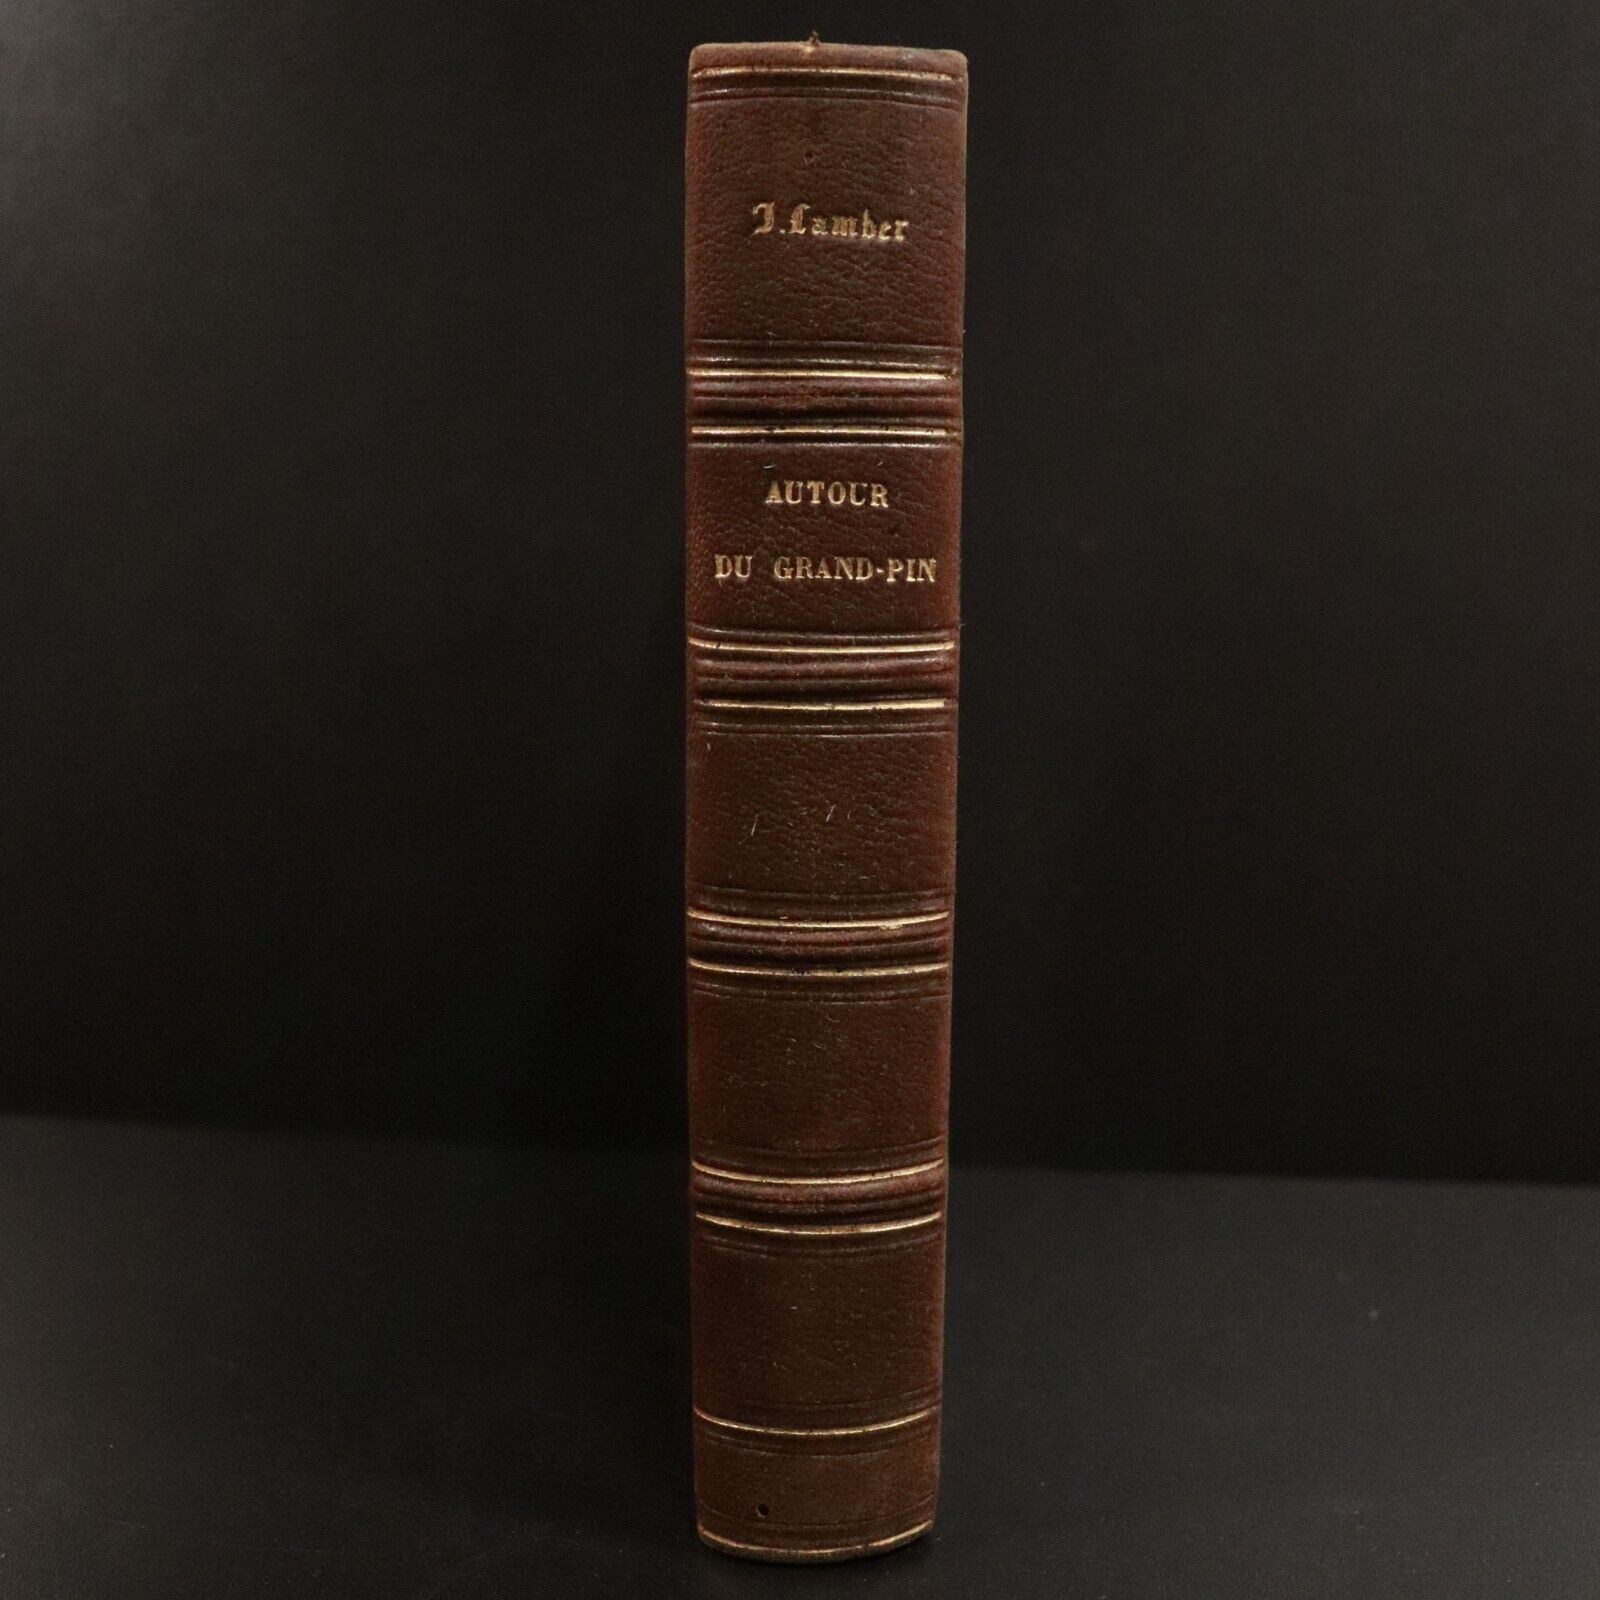 1863 Voyage Autour Du Grand Pin by Juliette Lamber Antiquarian French Book